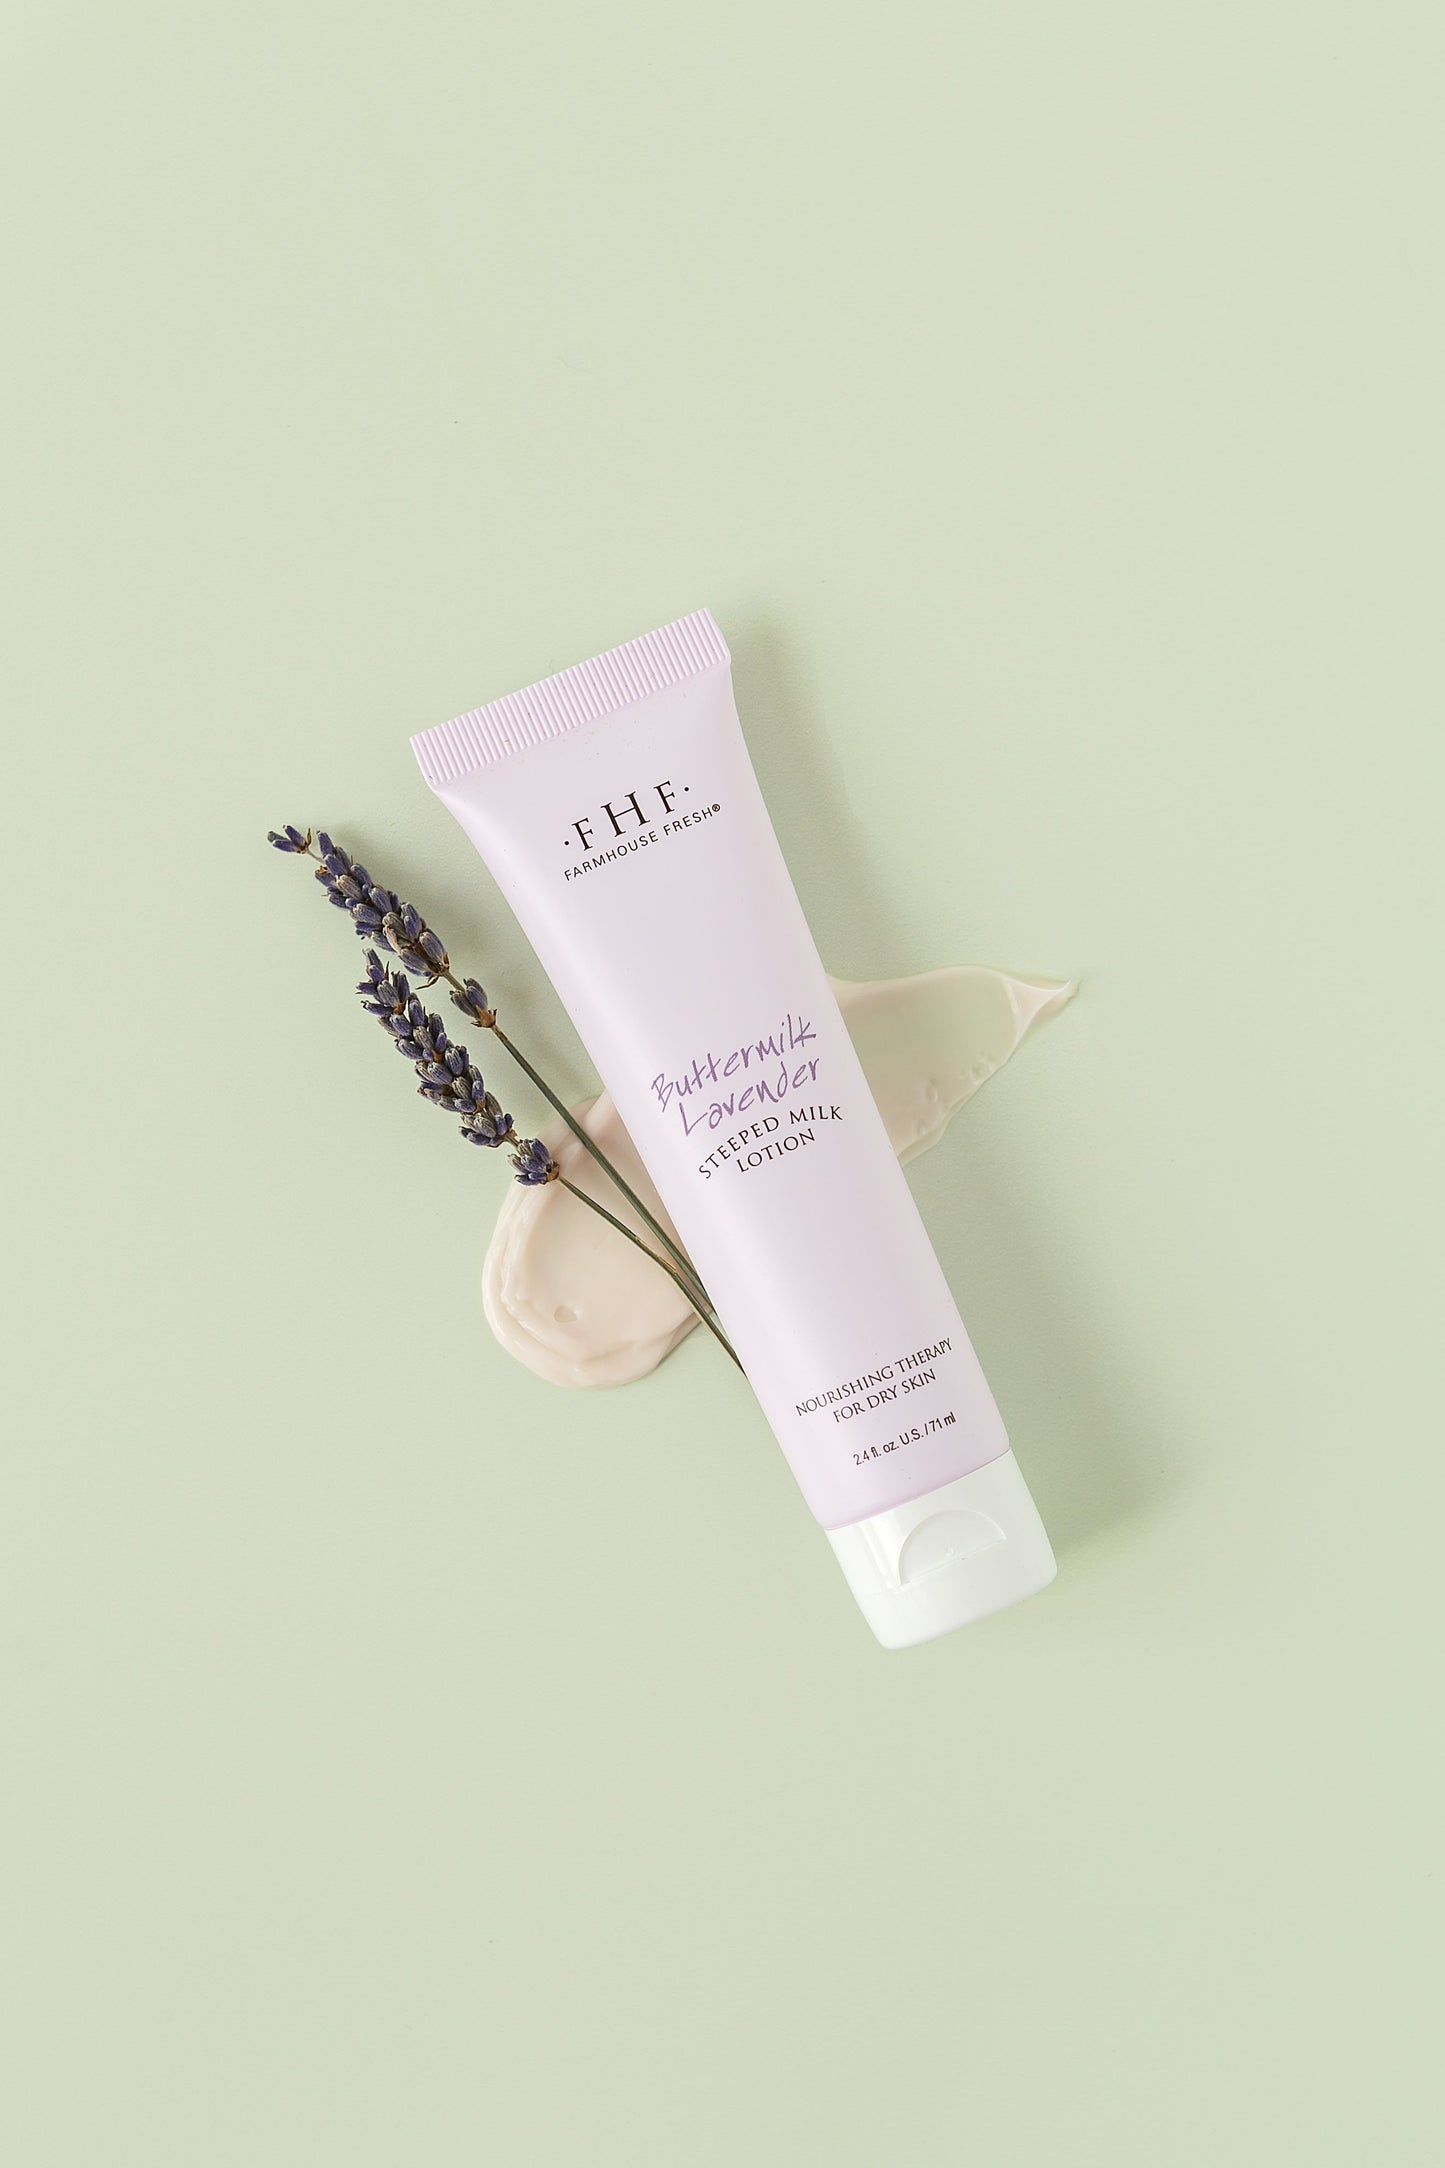 Buttermilk Lavender Steeped Milk Lotion® for Hands